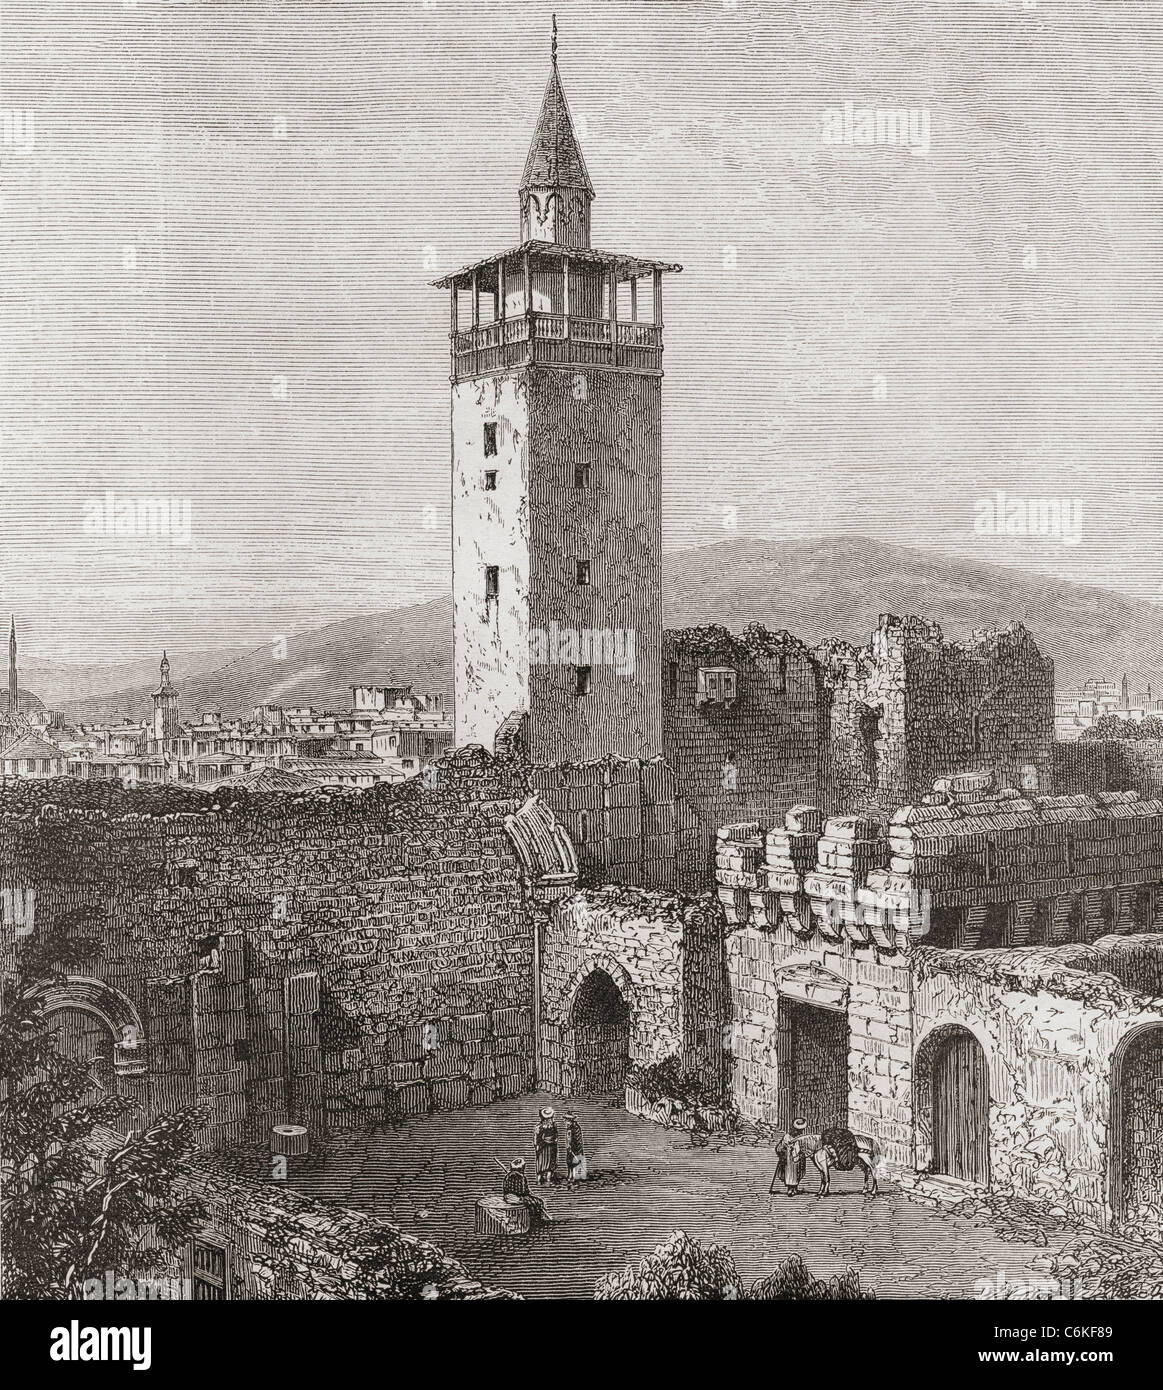 Bab Sharqi, The Eastern Gate, Damascus, Syria in the 19th century. Stock Photo